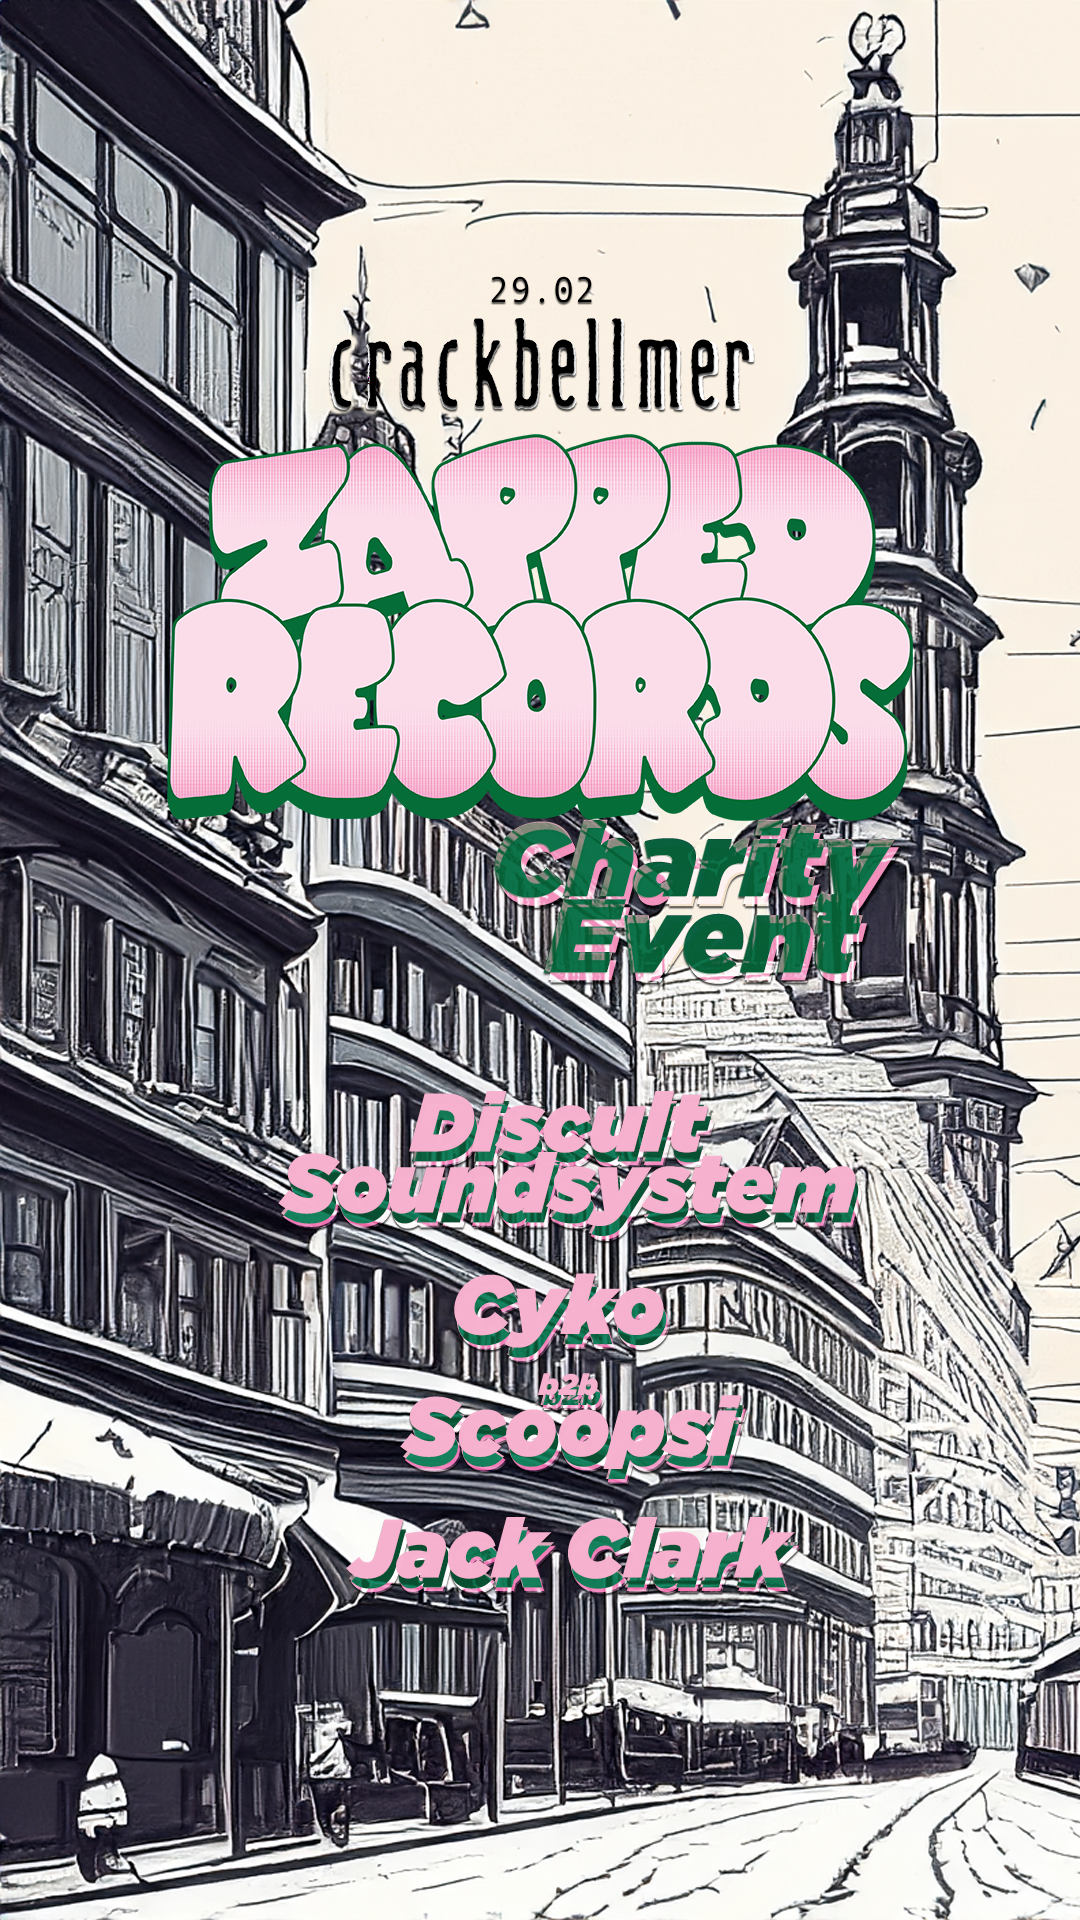 Zapped Records - Charity Event with Discult Soundsystem, Scoopsi, Cyko, Jack Clark - Página frontal